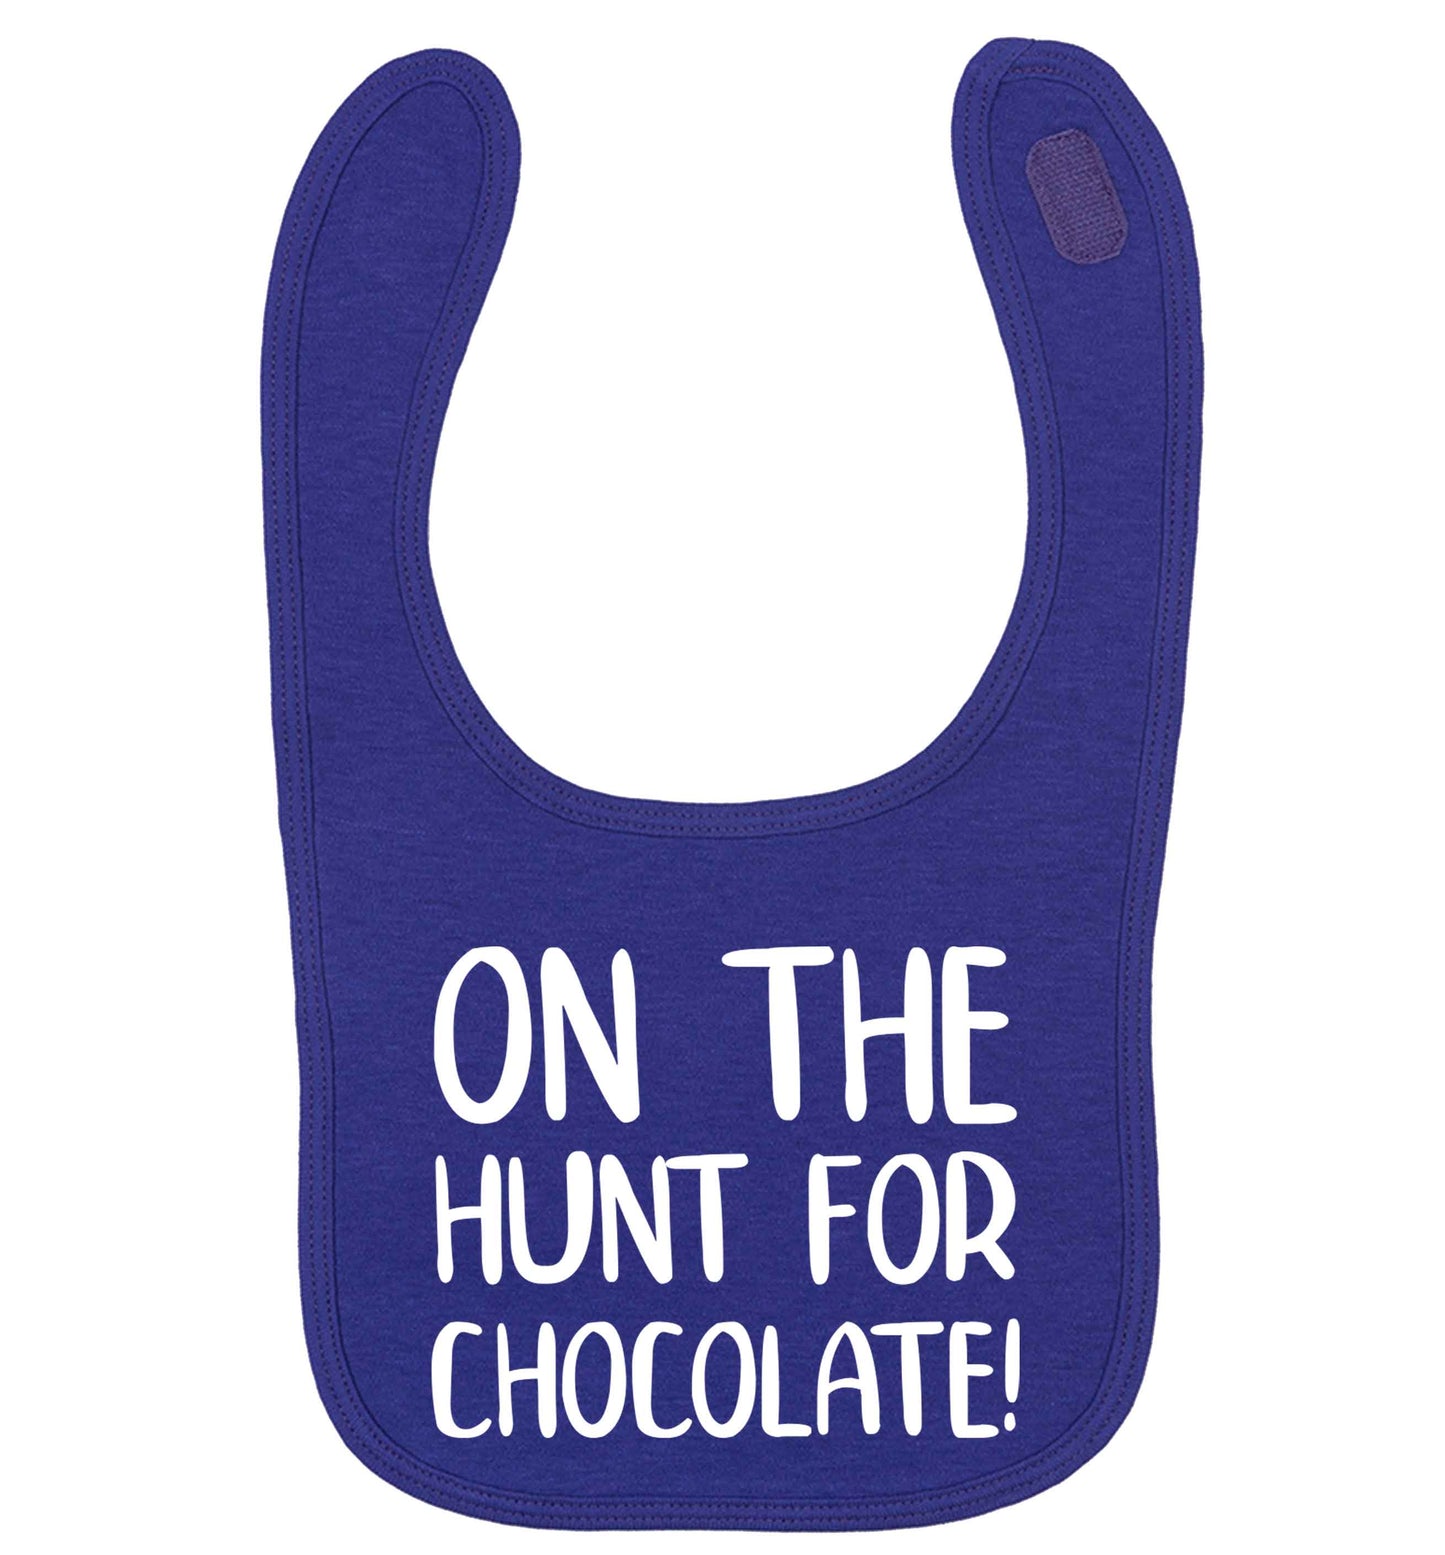 On the hunt for chocolate! | baby bib